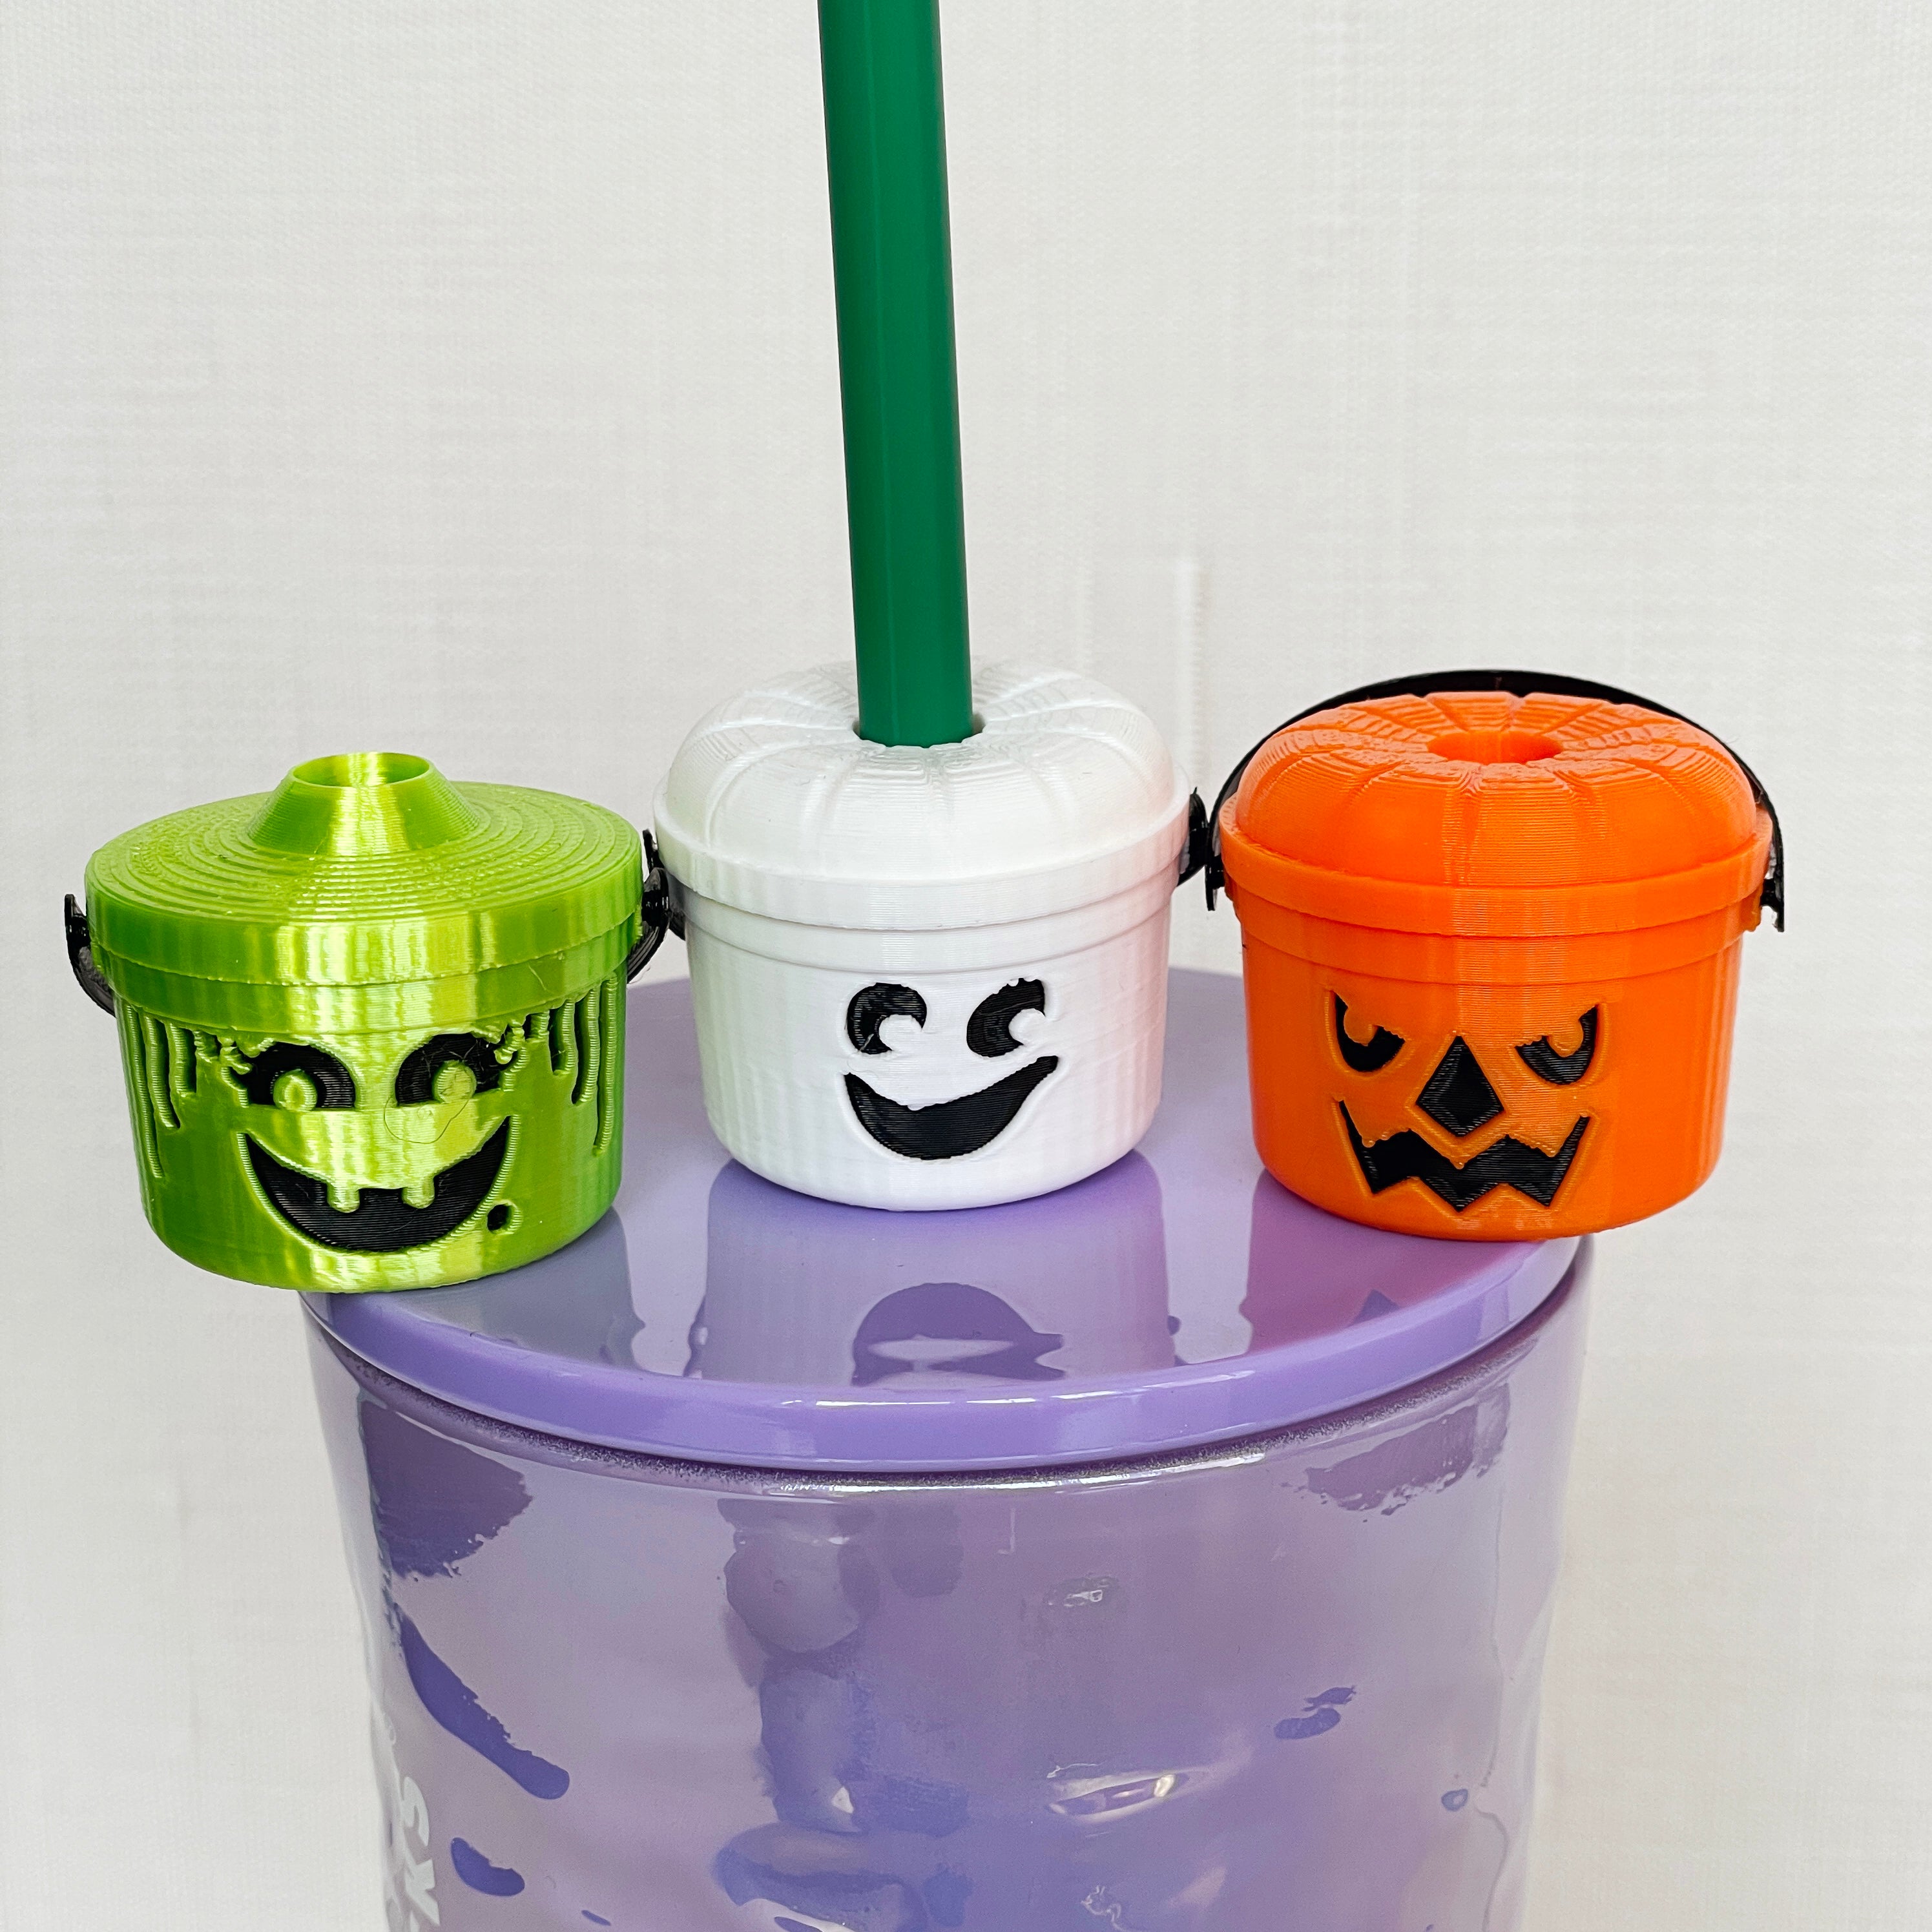 Décor-a-licious - Halloween STRAW TOPPERS are here